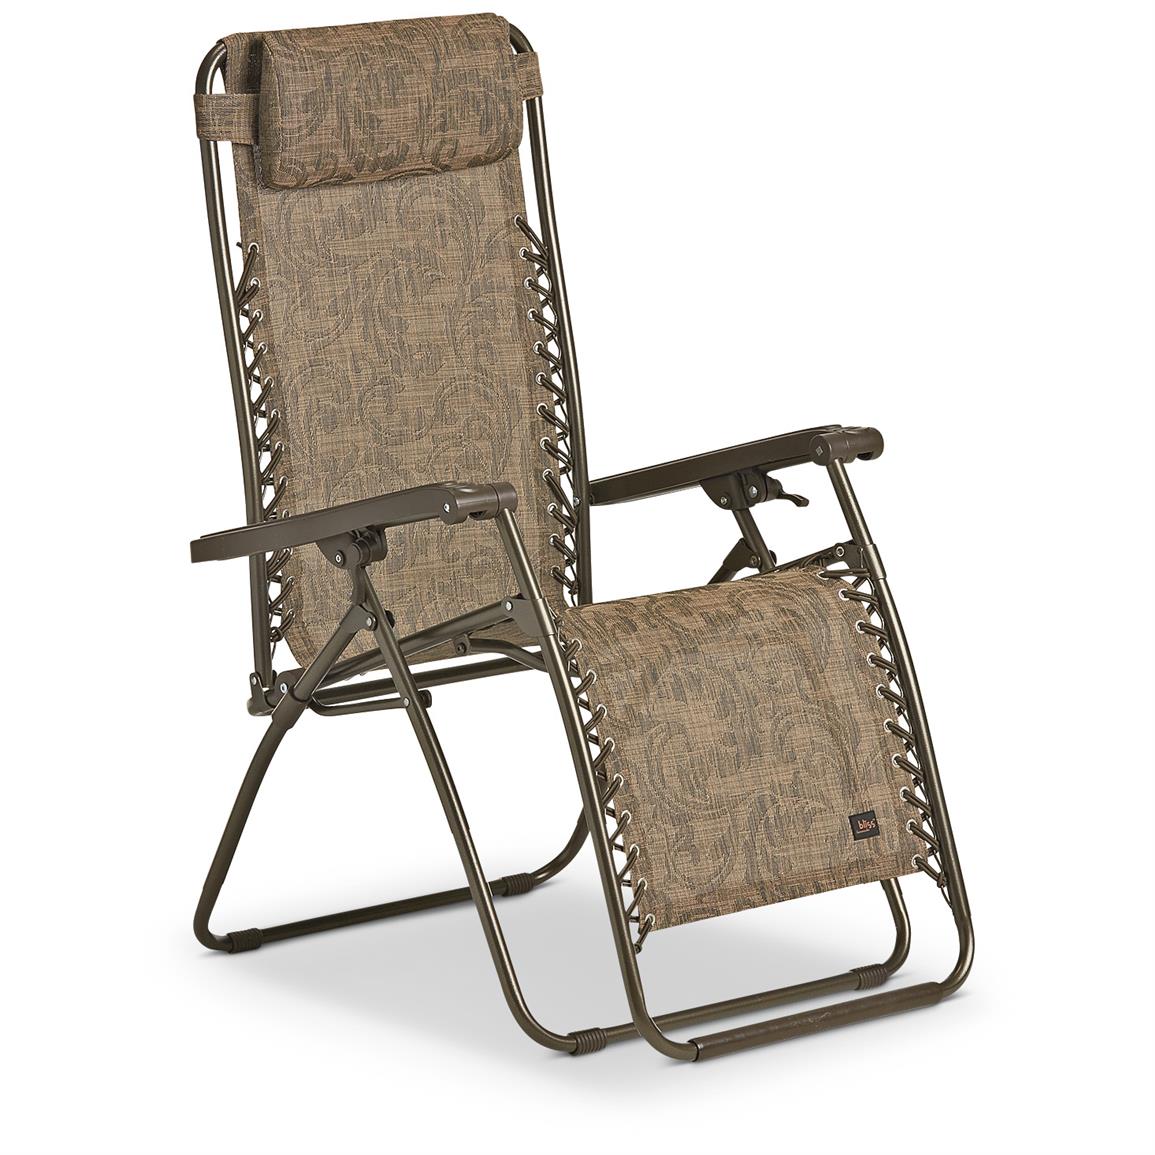 Bliss Deluxe Gravity Chair - 658373, Chairs at Sportsman's Guide